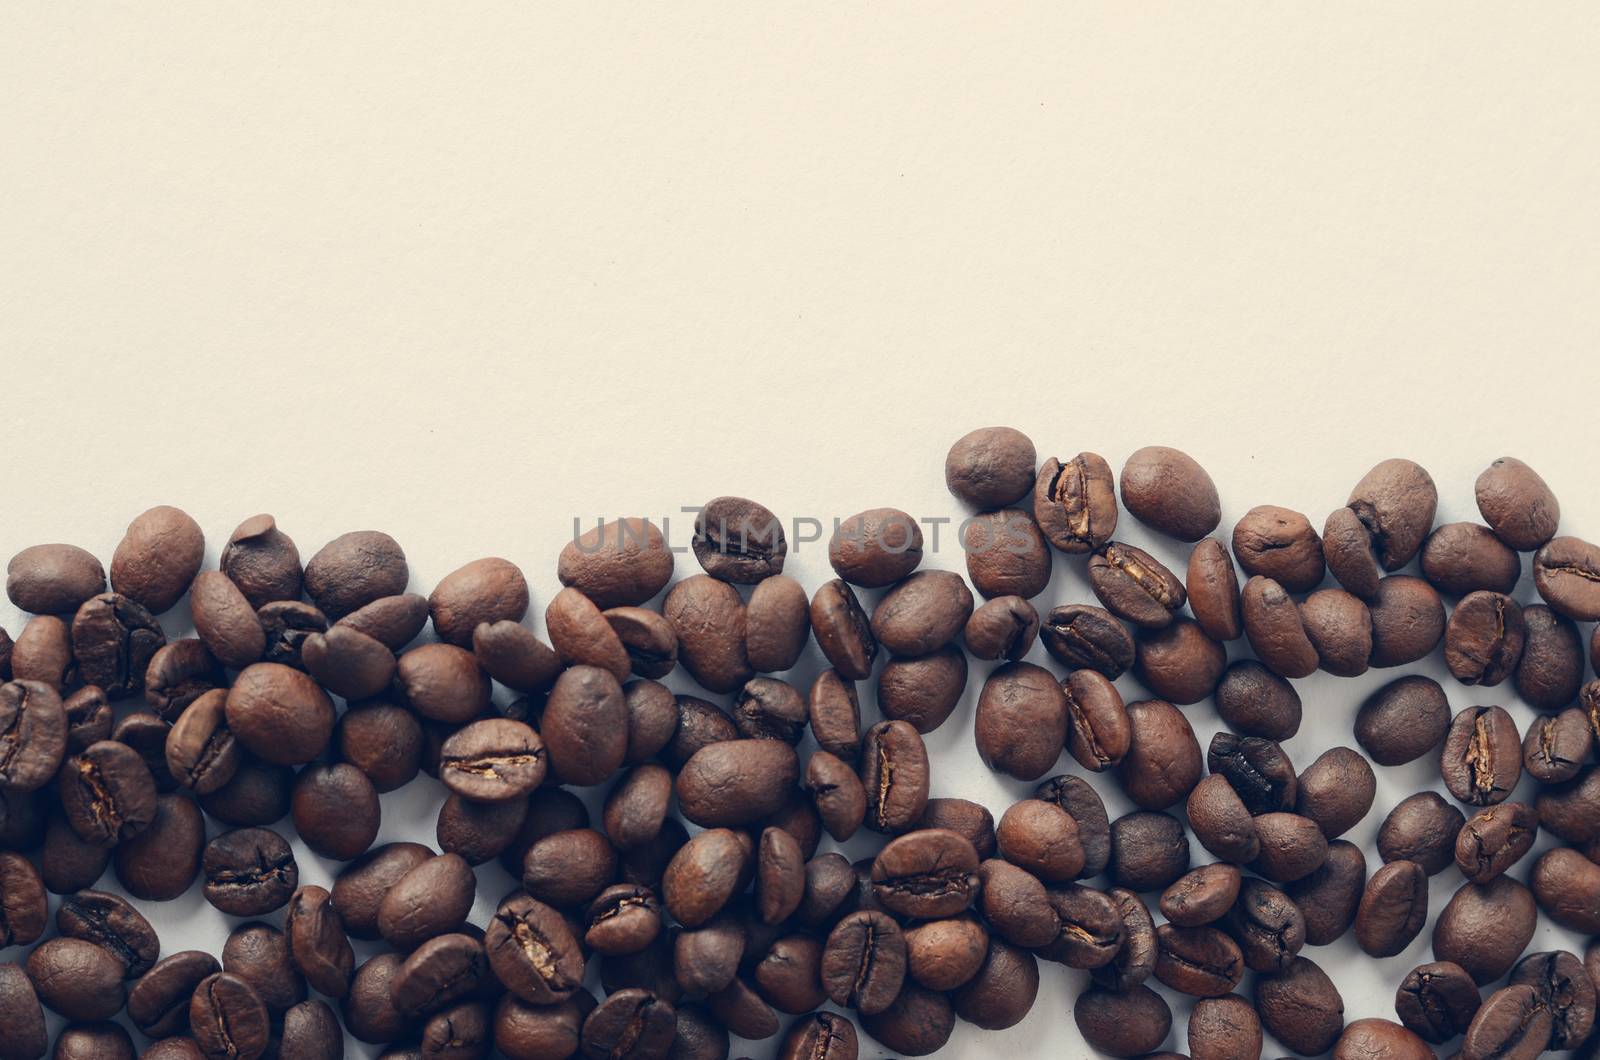 coffee beans in retro colors by sarkao